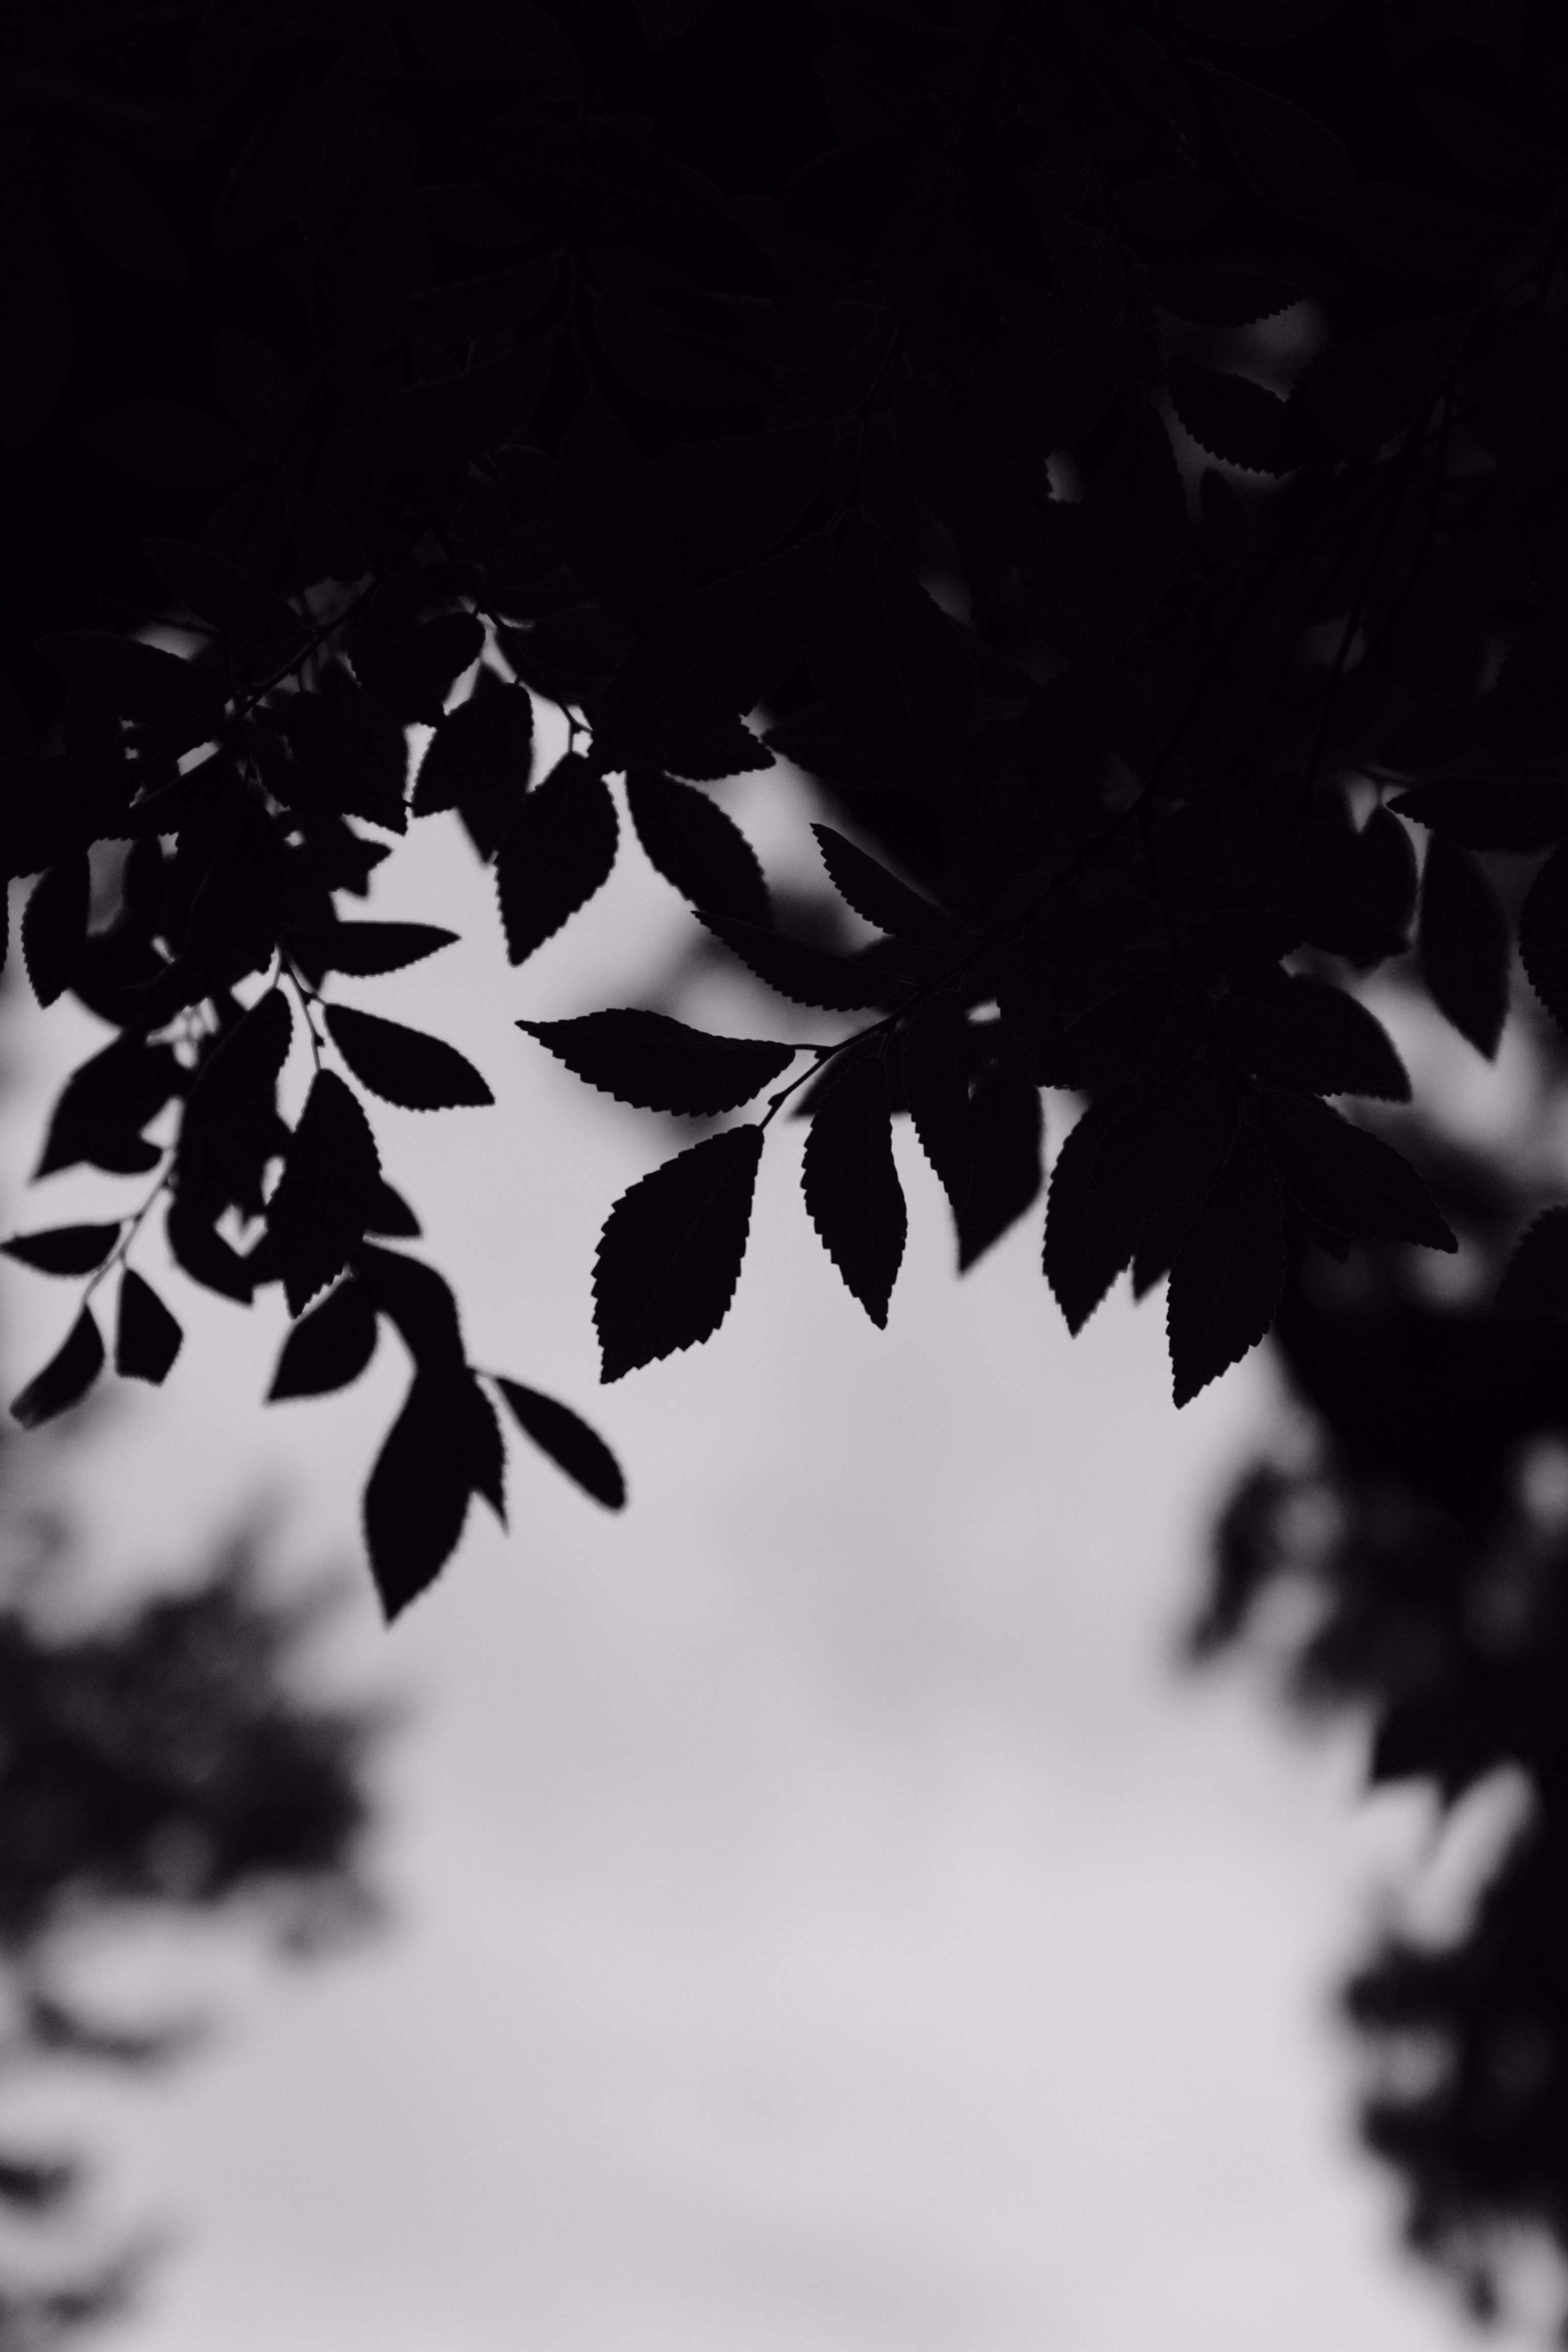 leaves, outlines, black, chb, branches, bw wallpaper for mobile